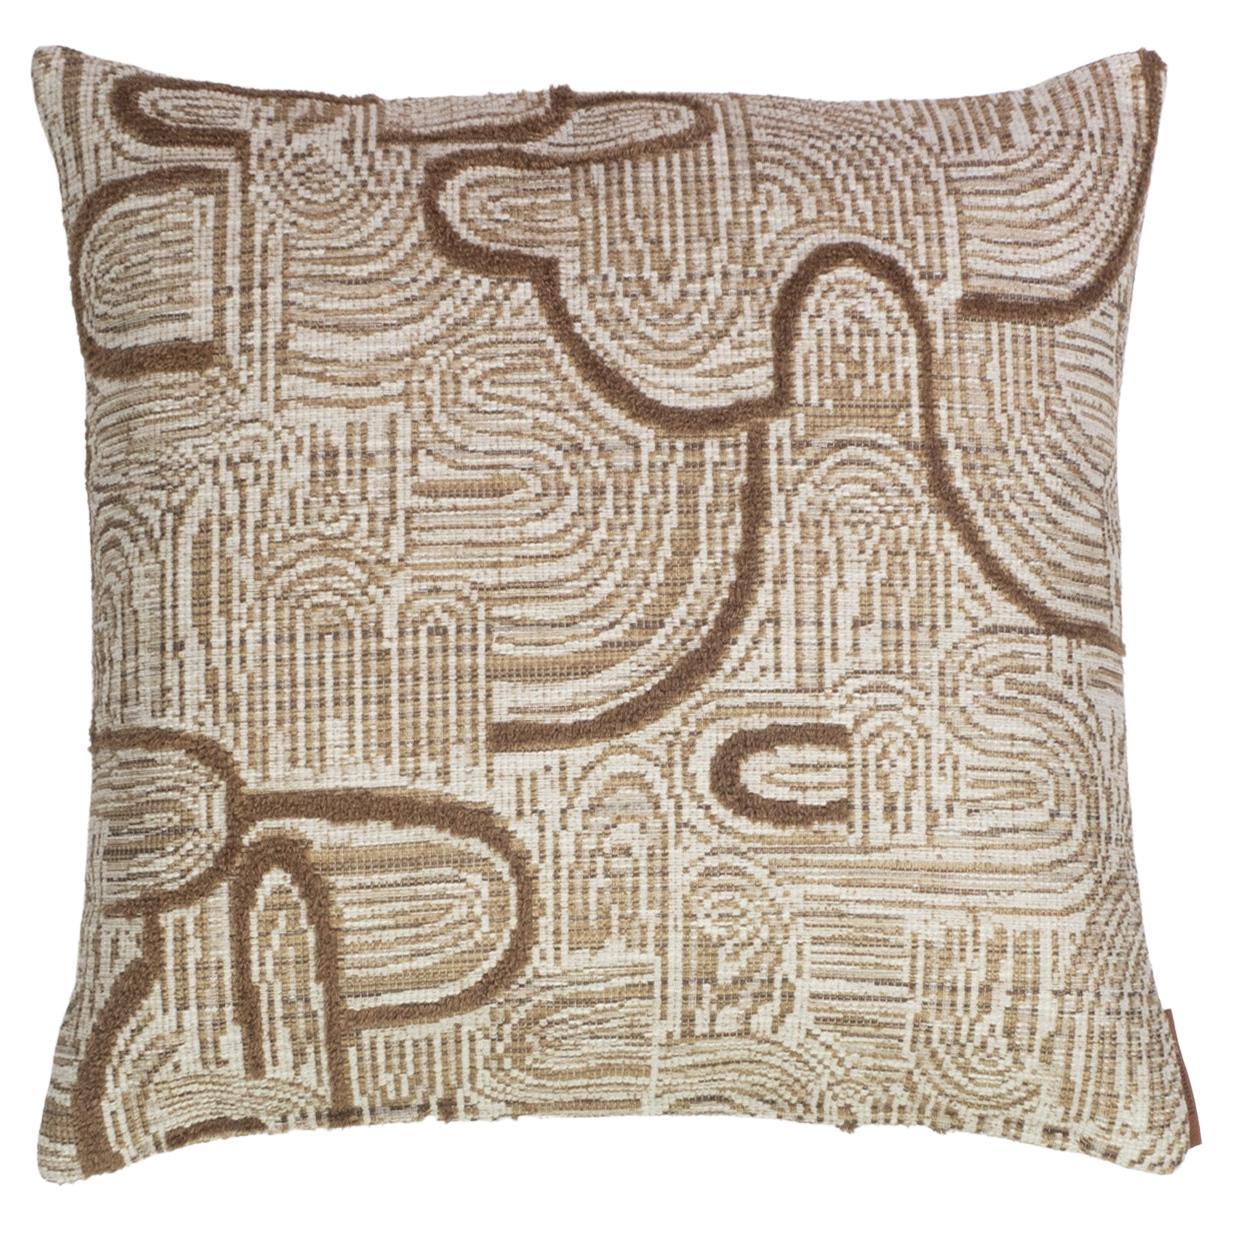 Modern Throw Patterned Pillow Camel Brown "Amsterdam" by Evolution21